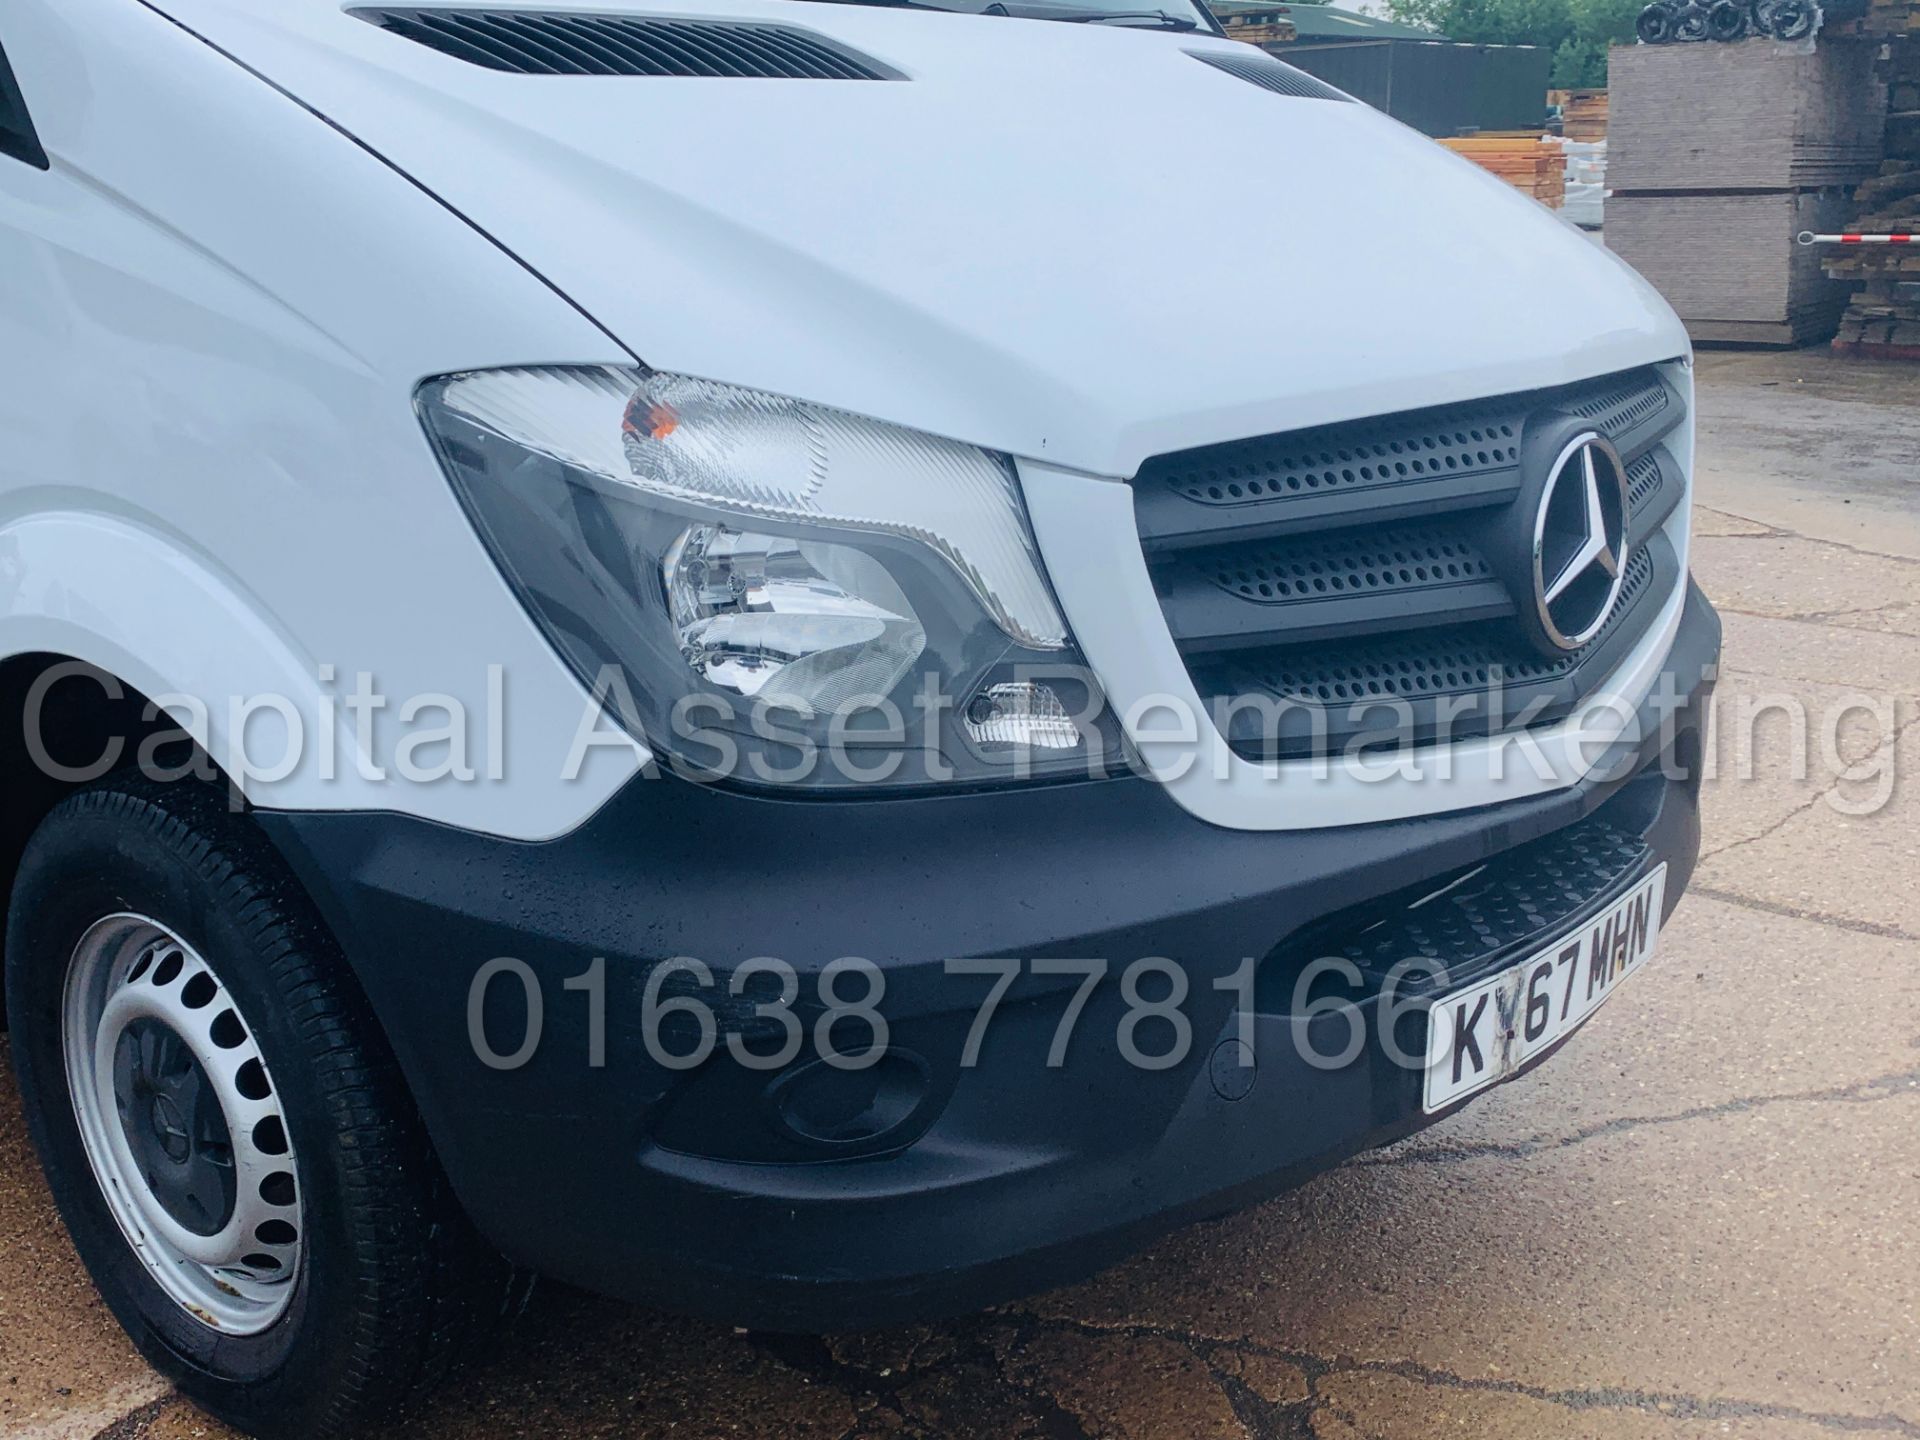 (On Sale) MERCEDES-BENZ 314 CDI *LWB - D/CAB TIPPER* (67 REG - EURO 6) '140 BHP - 6 SPEED' (1 OWNER) - Image 15 of 37